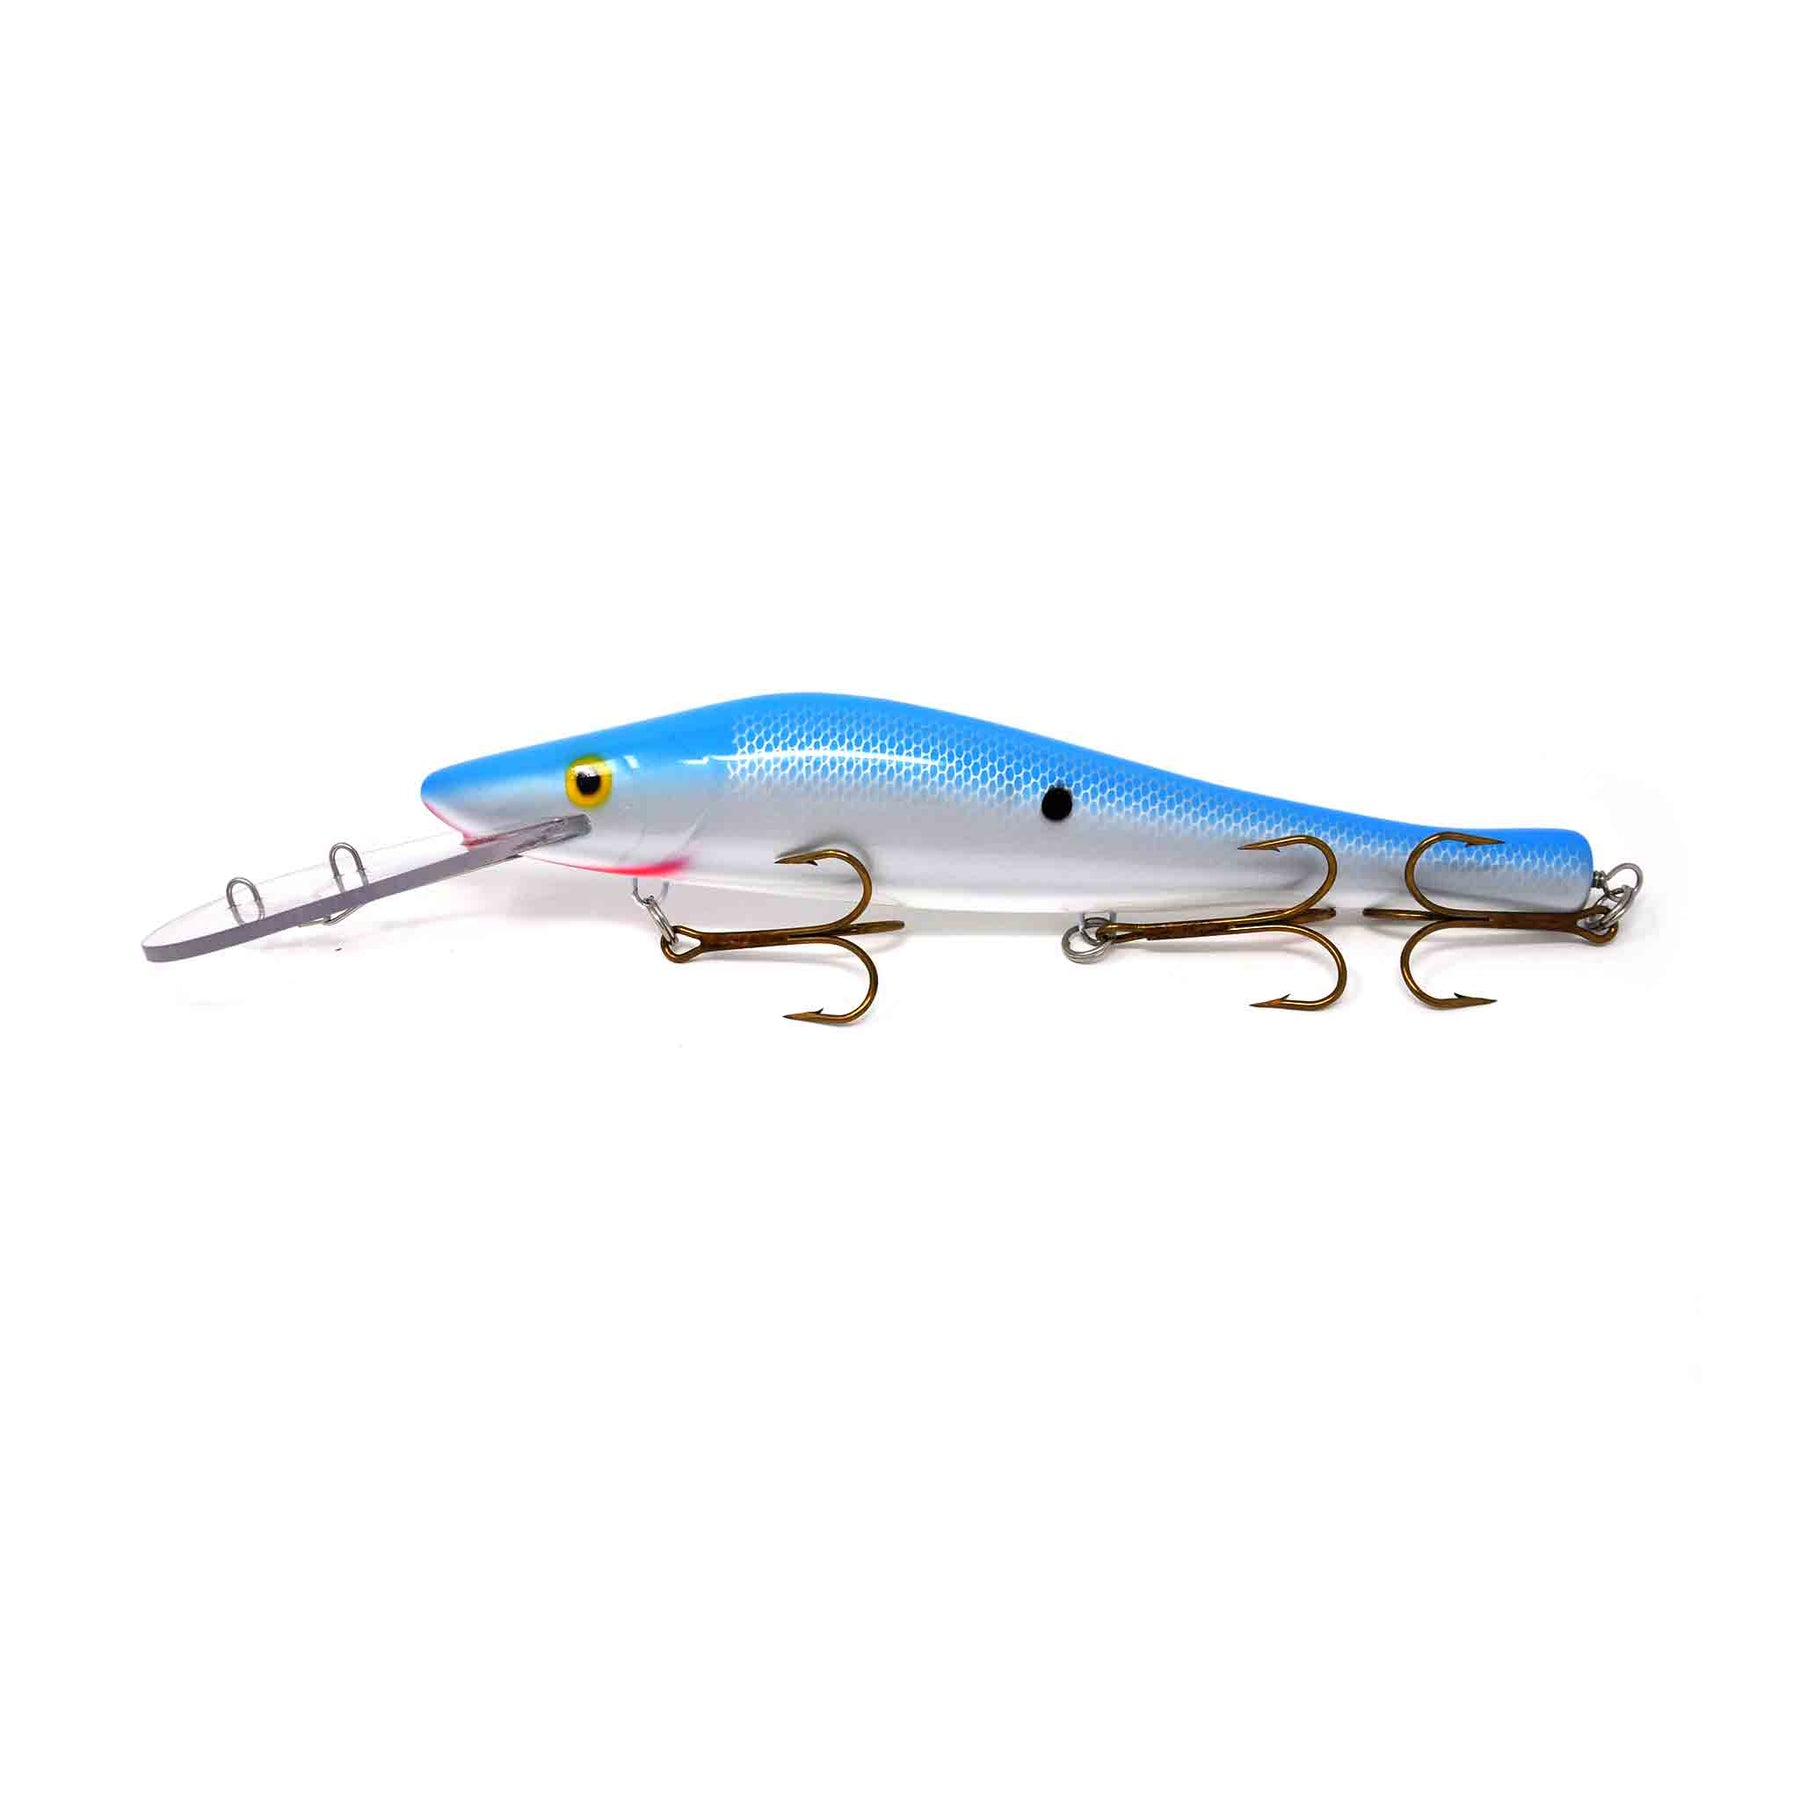 Sport King Lures 60 7956 Fishing Lure With Box